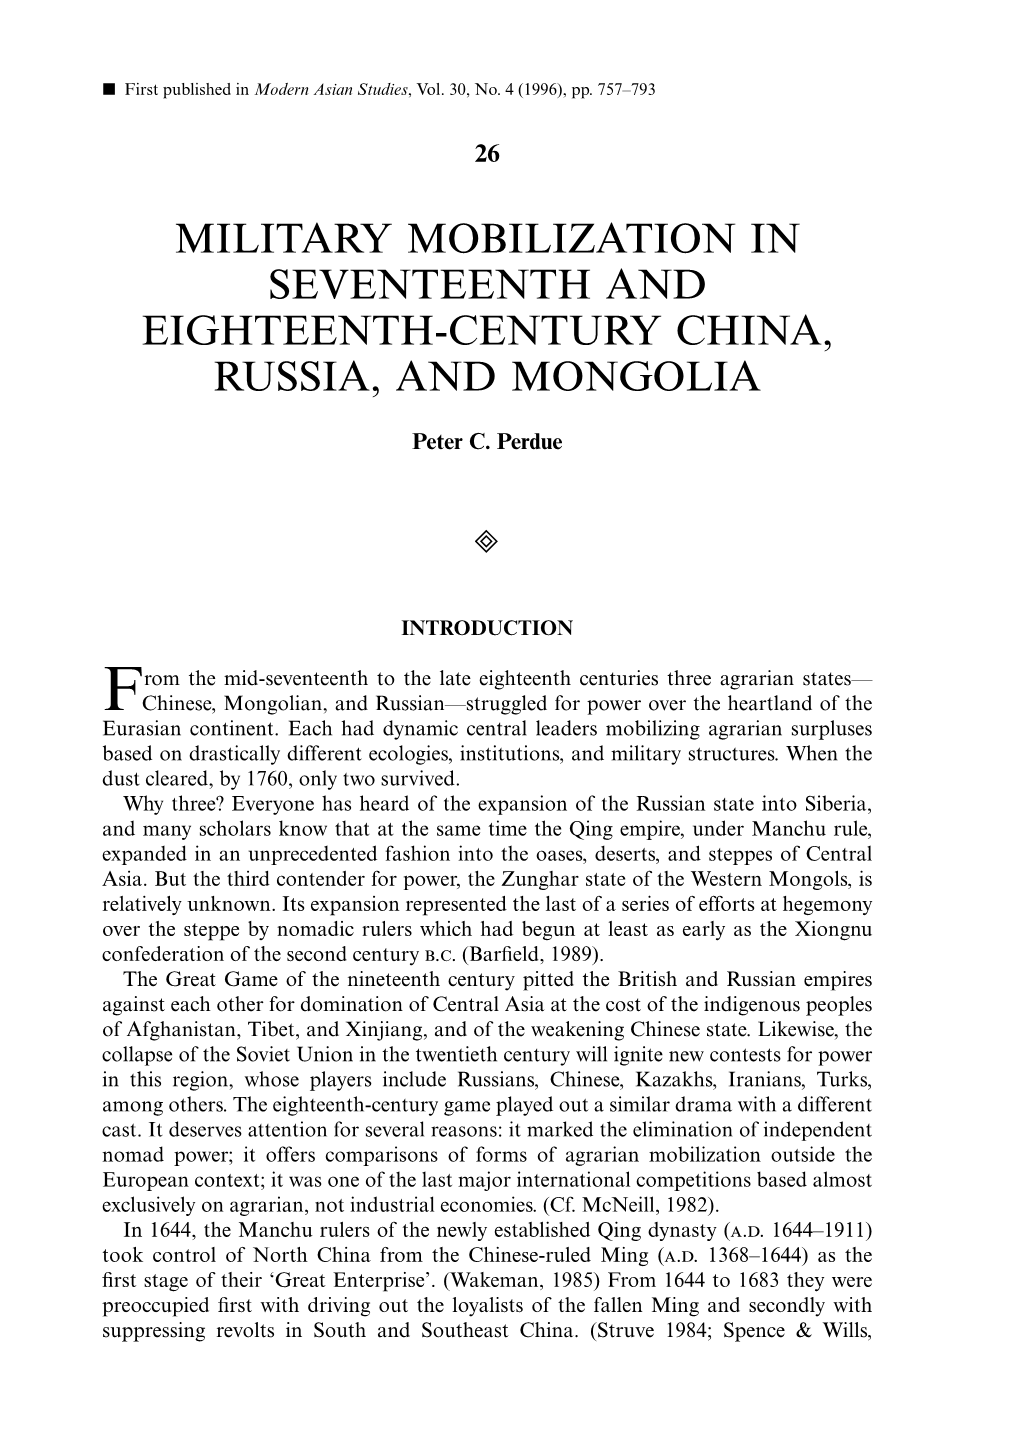 Military Mobilization in Seventeenth and Eighteenth-Century China, Russia, and Mongolia